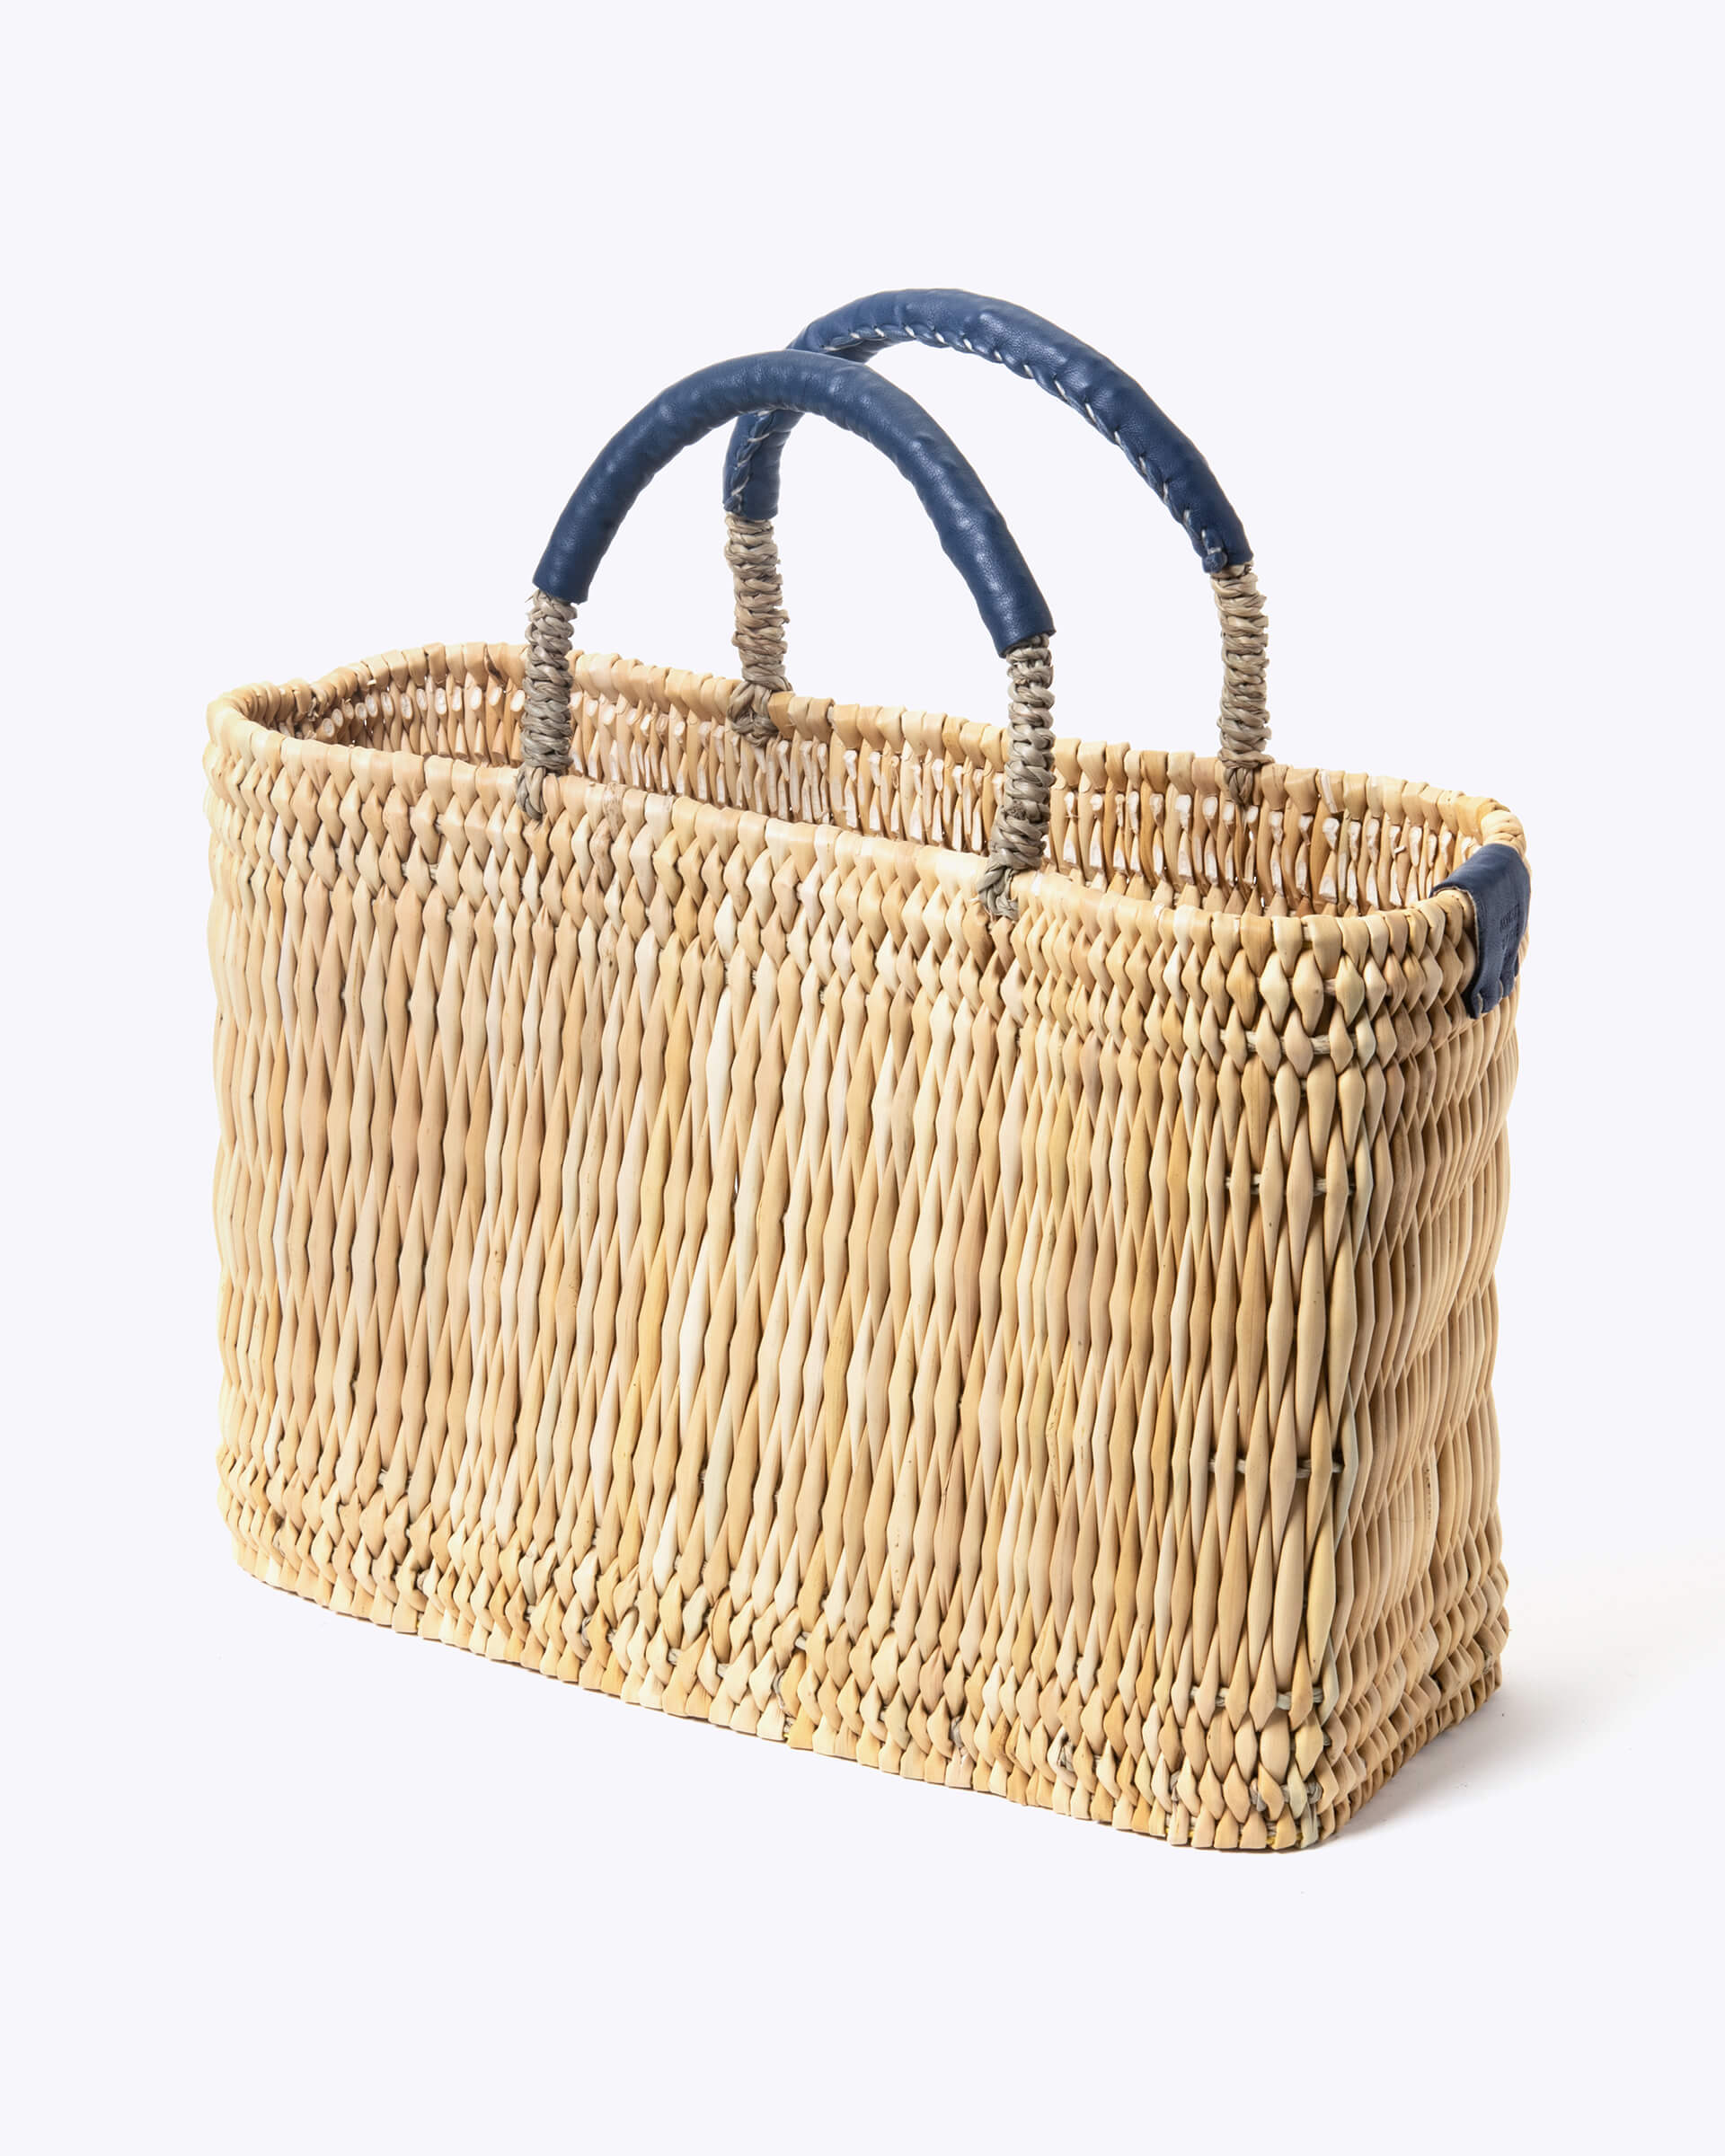 small straw basket wrapped with dark blue leather handle on a white background at an angle